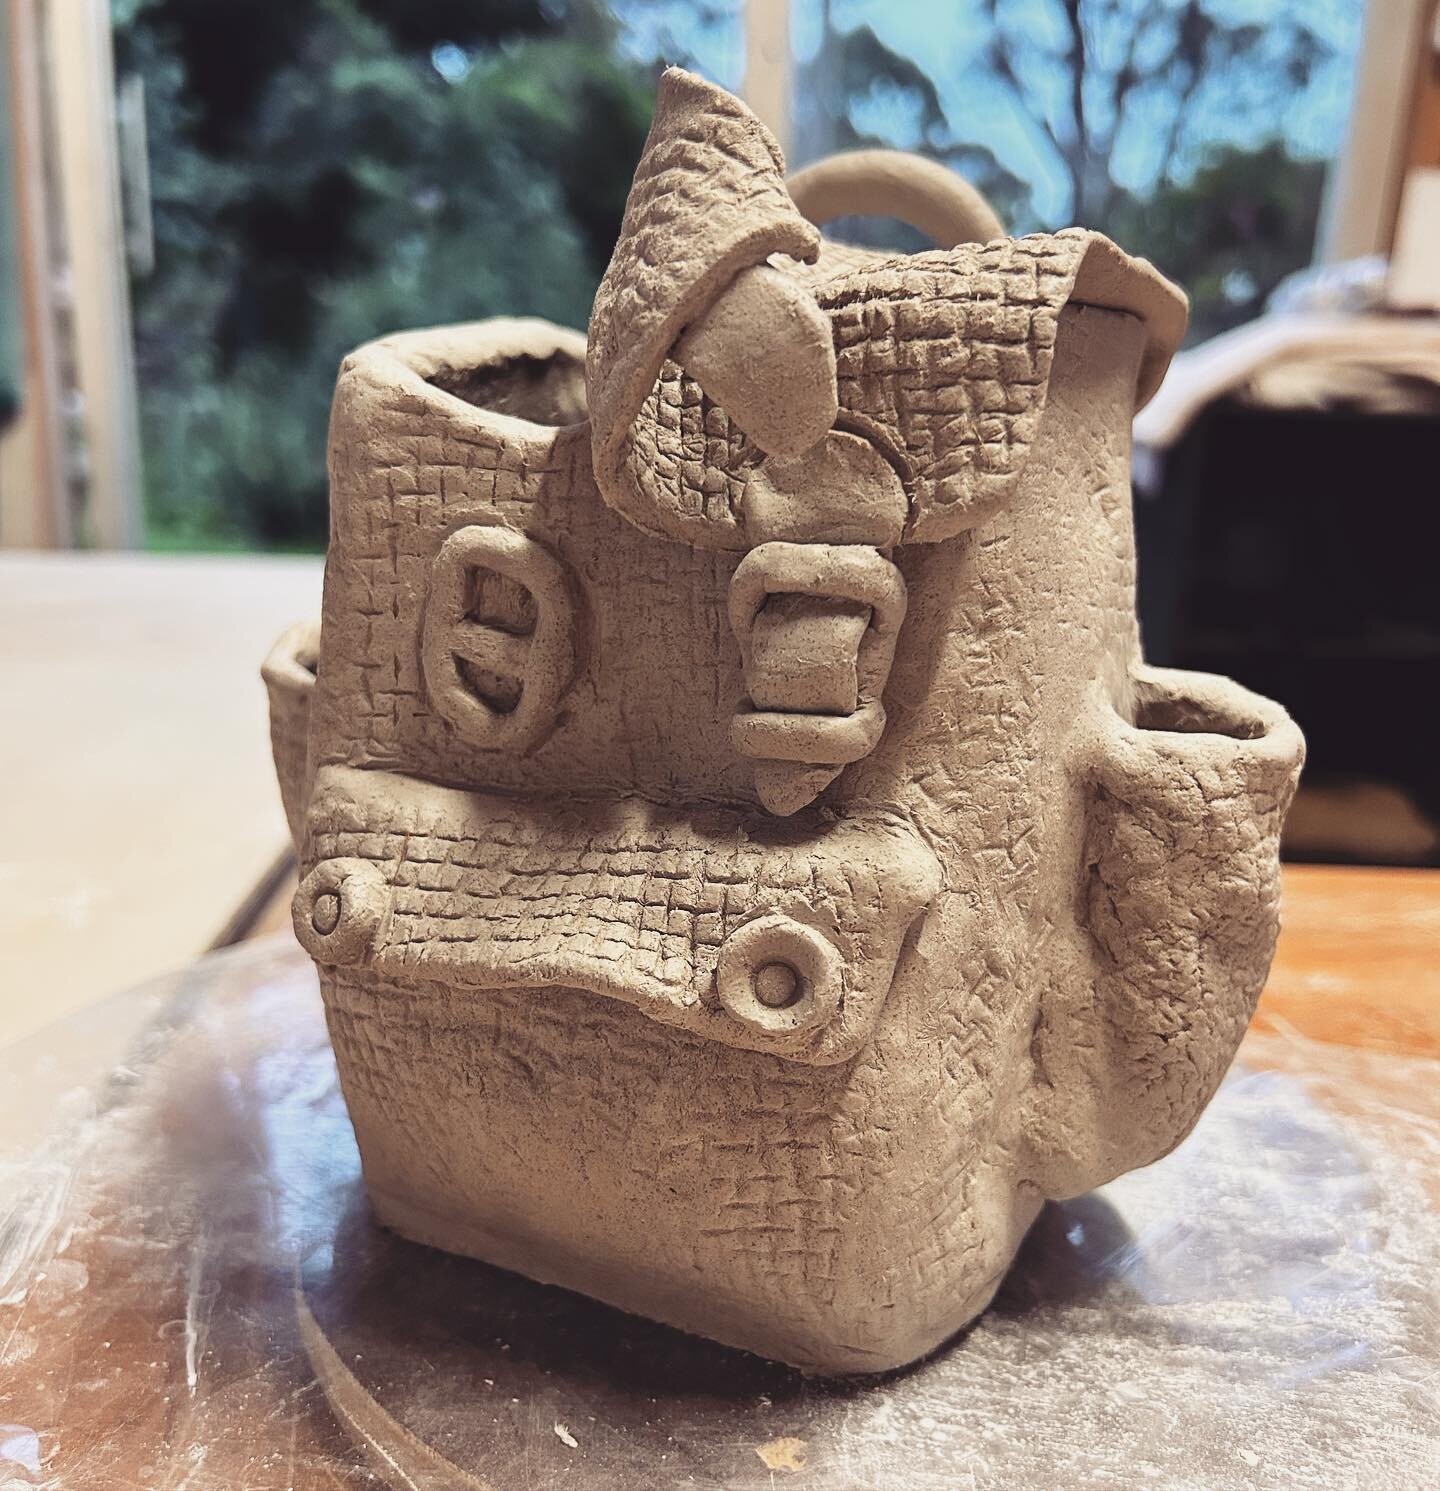 Making for the sake of making. Loving getting my hands in the earth and learning to shape clay with the legend of Narooma town @jennibourke1 - forming a tiny desktop rucksack stationery holder 🎒 so much fun to get lost in paper clay and conversation